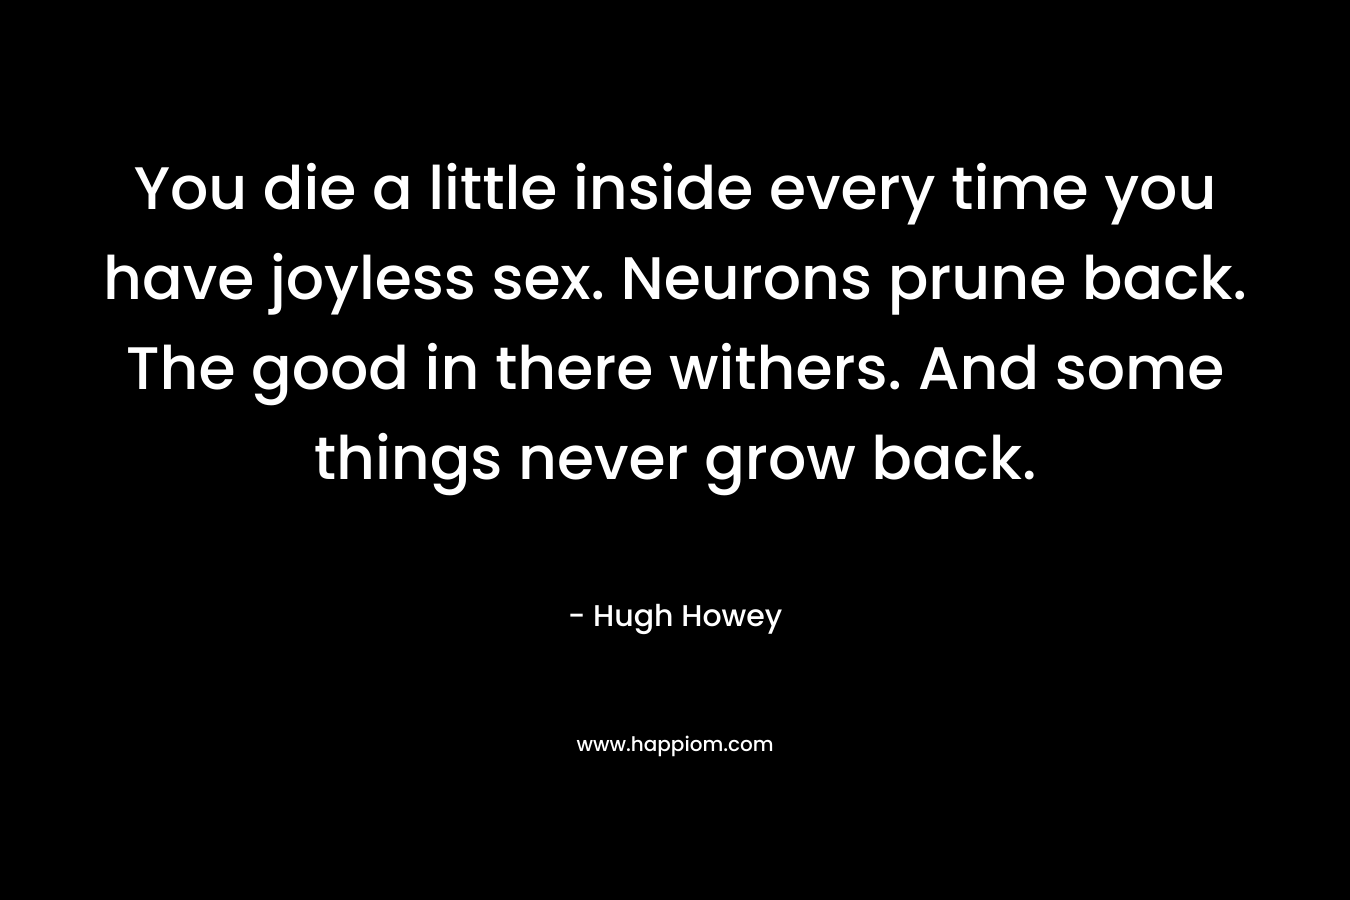 You die a little inside every time you have joyless sex. Neurons prune back. The good in there withers. And some things never grow back. – Hugh Howey